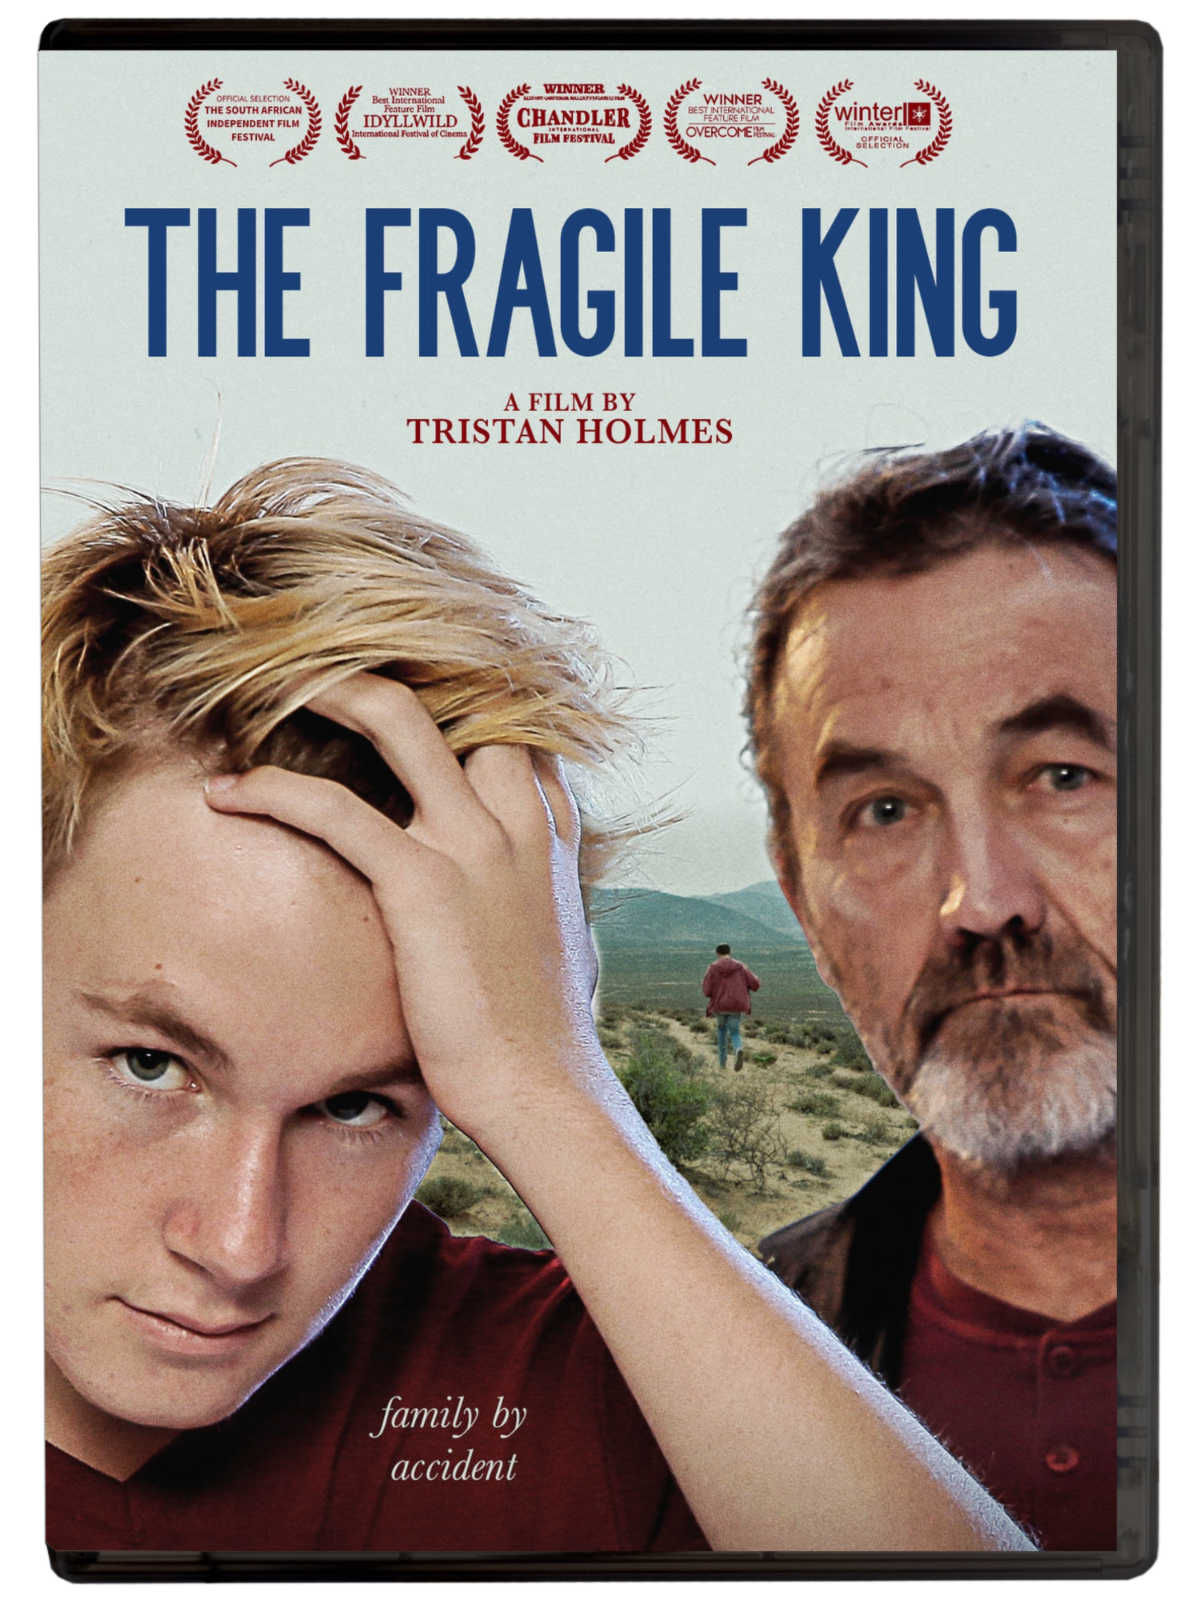 Loss and family estrangement forge a powerful bond in the moving award-winning South African drama, The Fragile King.